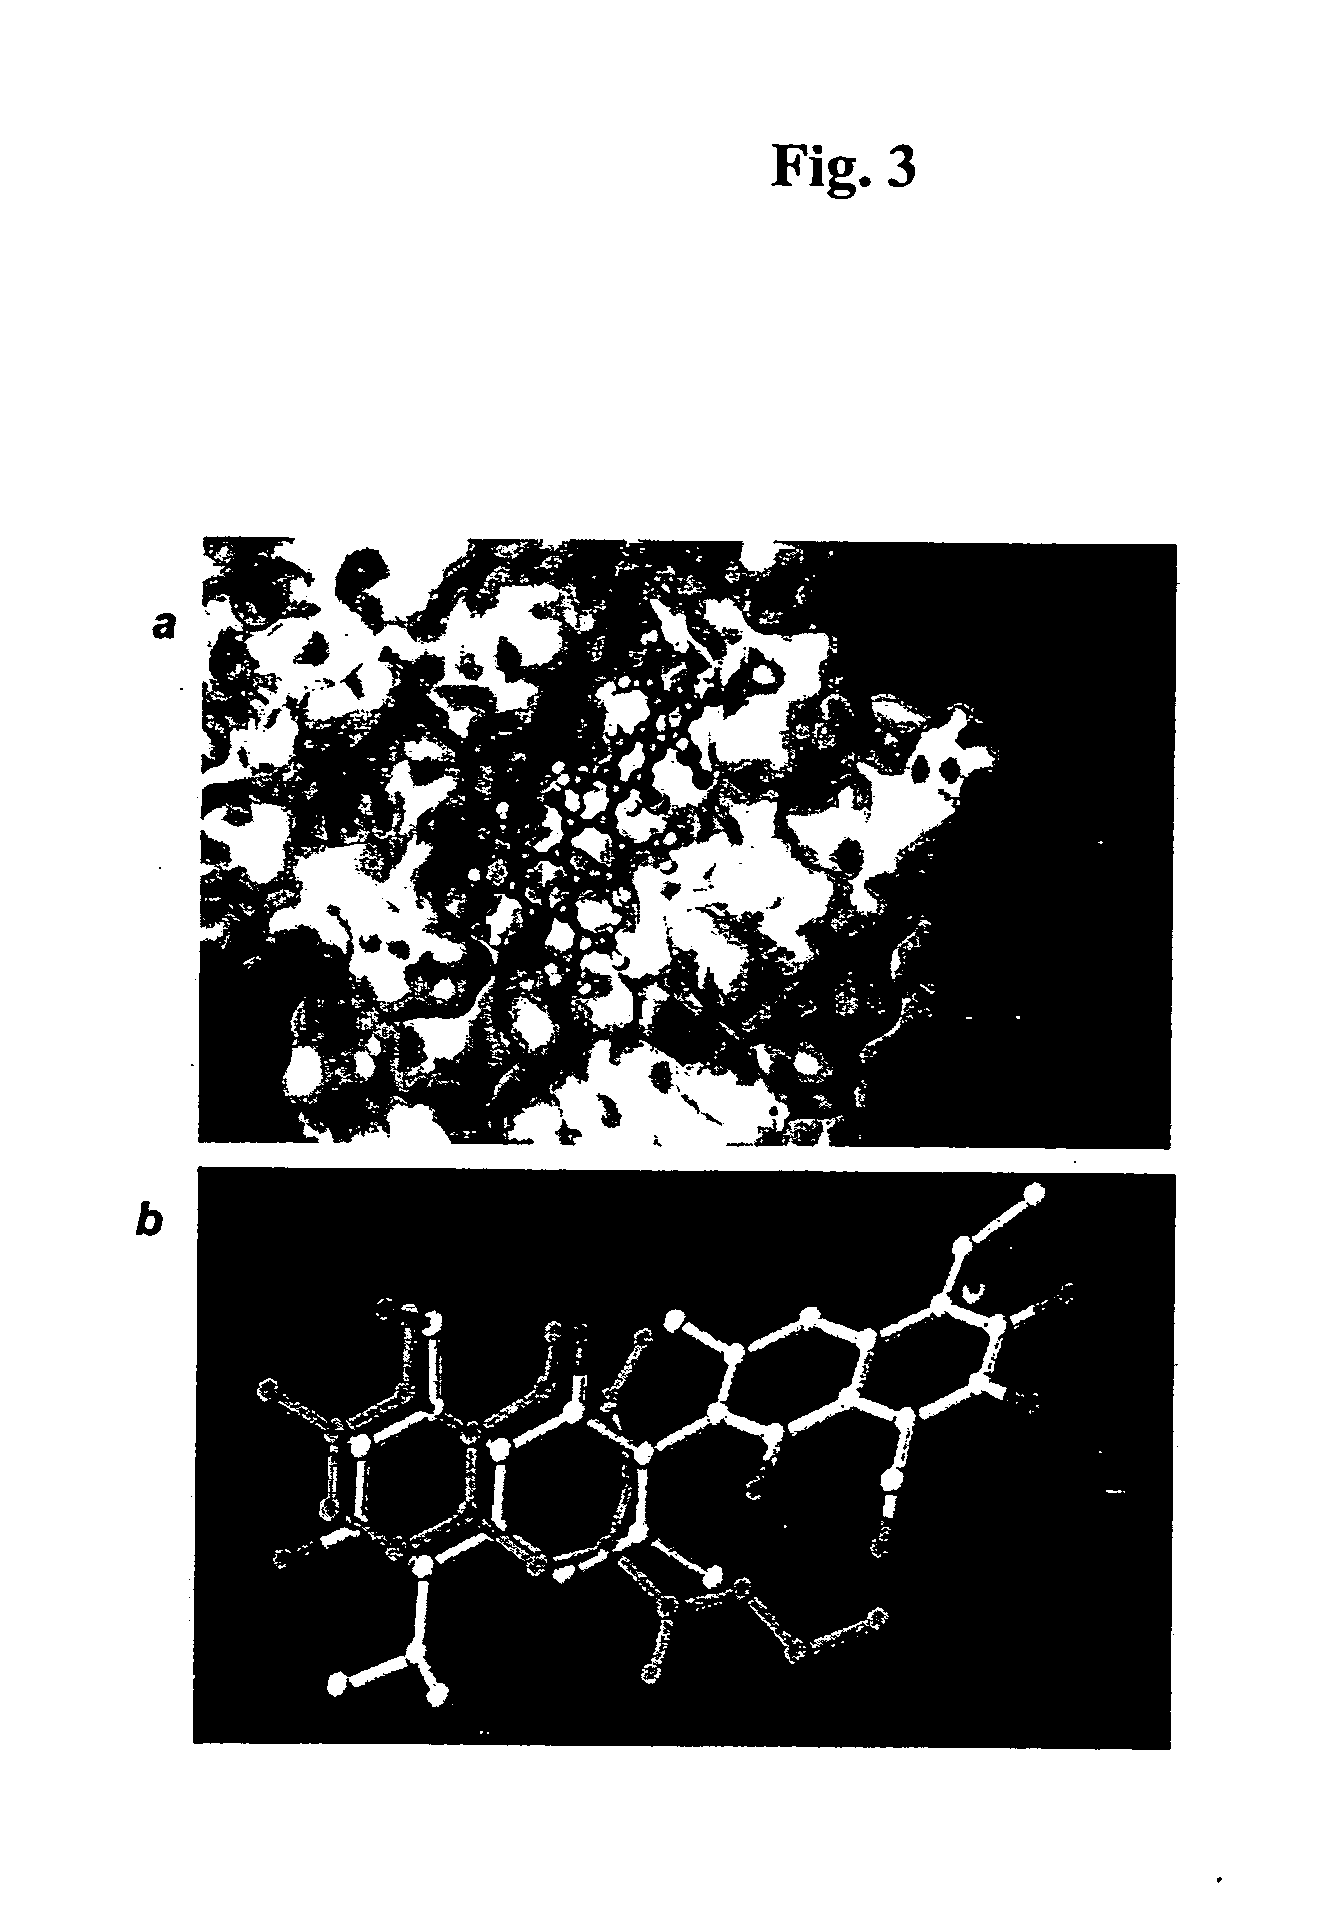 Methods and compounds useful to induce apoptosis in cancer cells